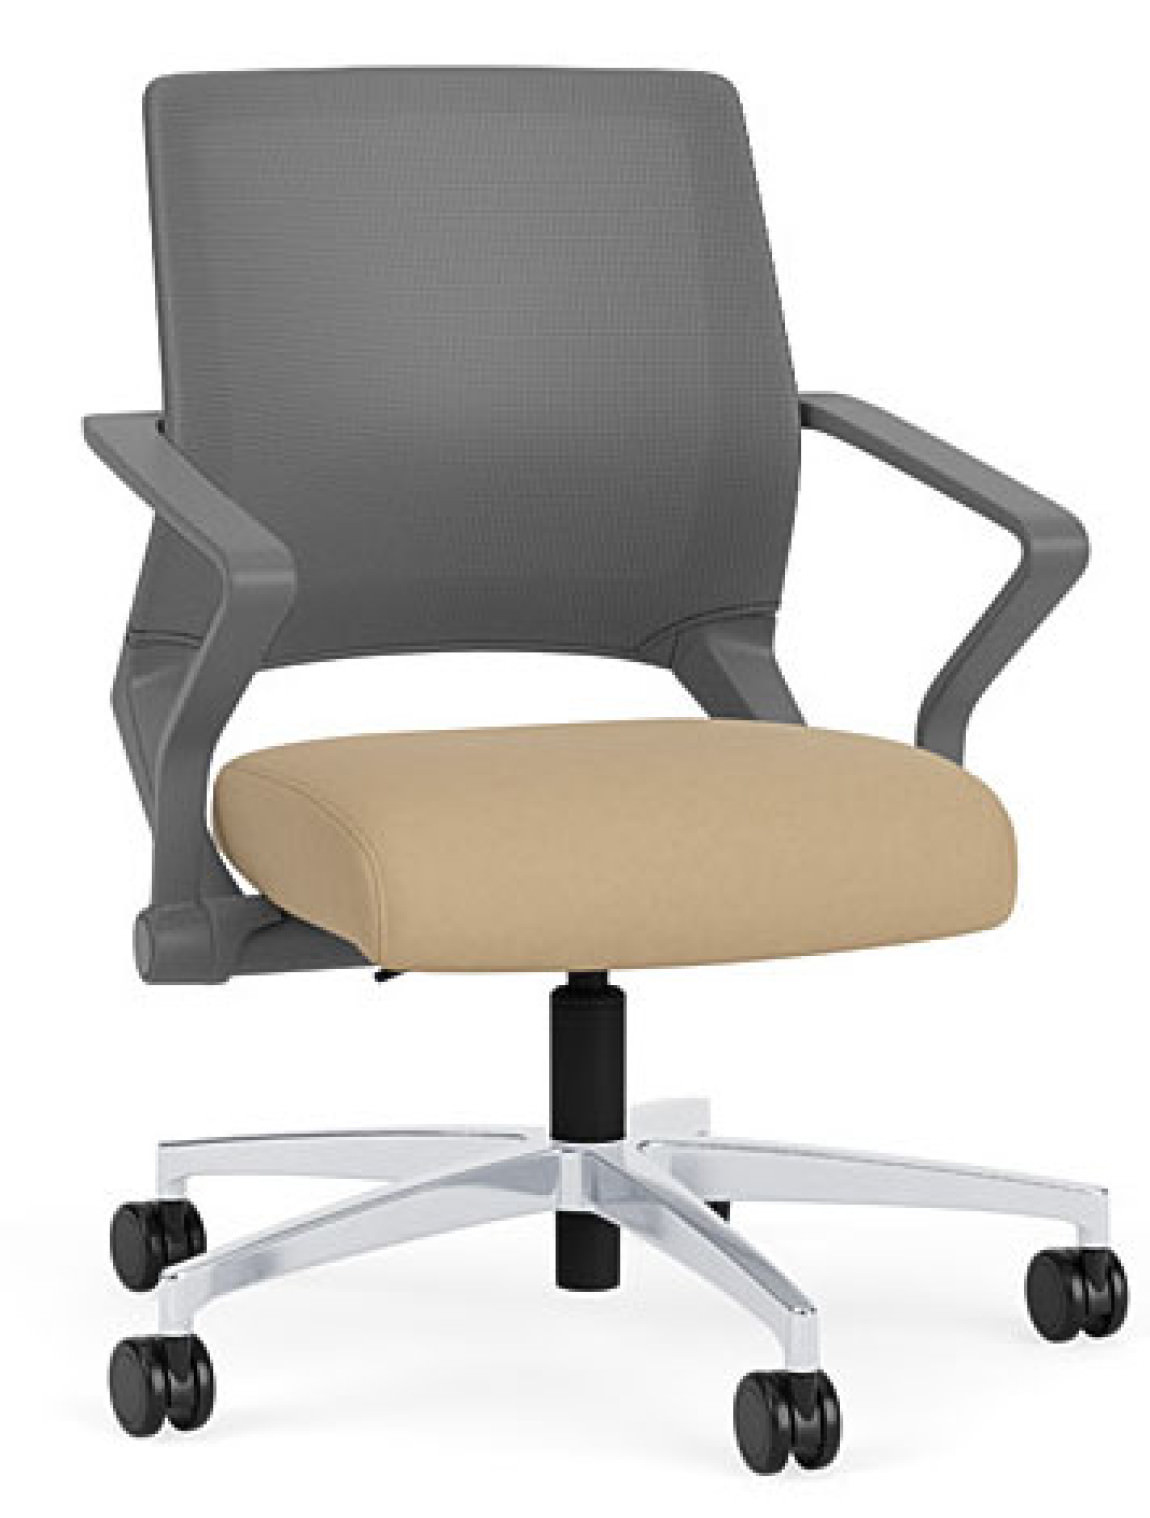 Mesh Back Conference Chair with Leather Seat